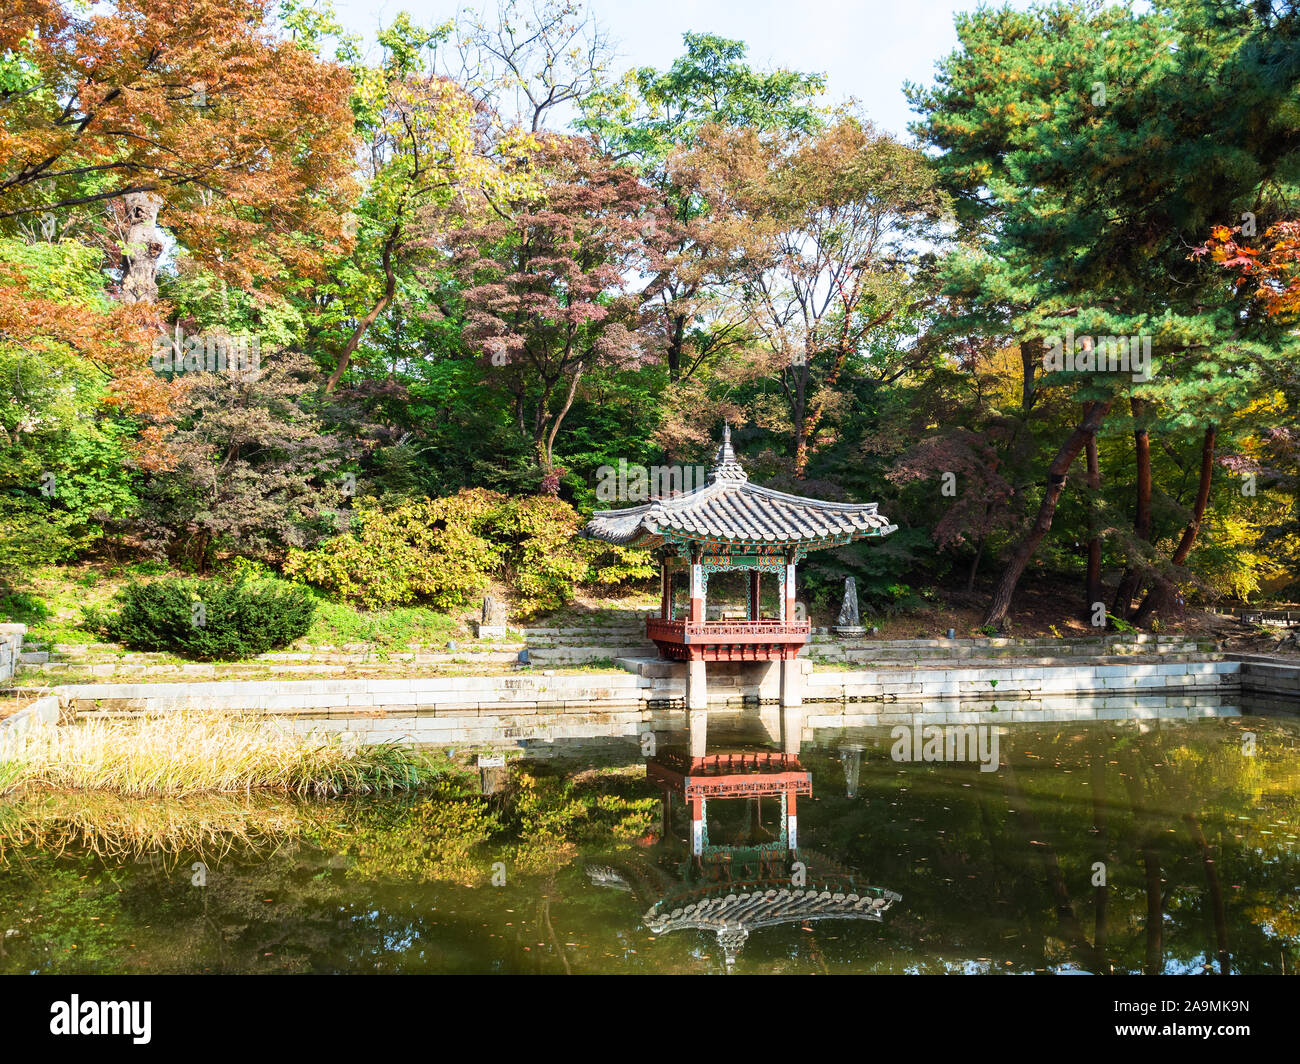 SEOUL, SOUTH KOREA - OCTOBER 31, 2019: Aeryeonjeong Pavilion and Aeryeonji pond in Huwon Secret Rear Garden of Changdeokgung Palace Complex in Seoul c Stock Photo